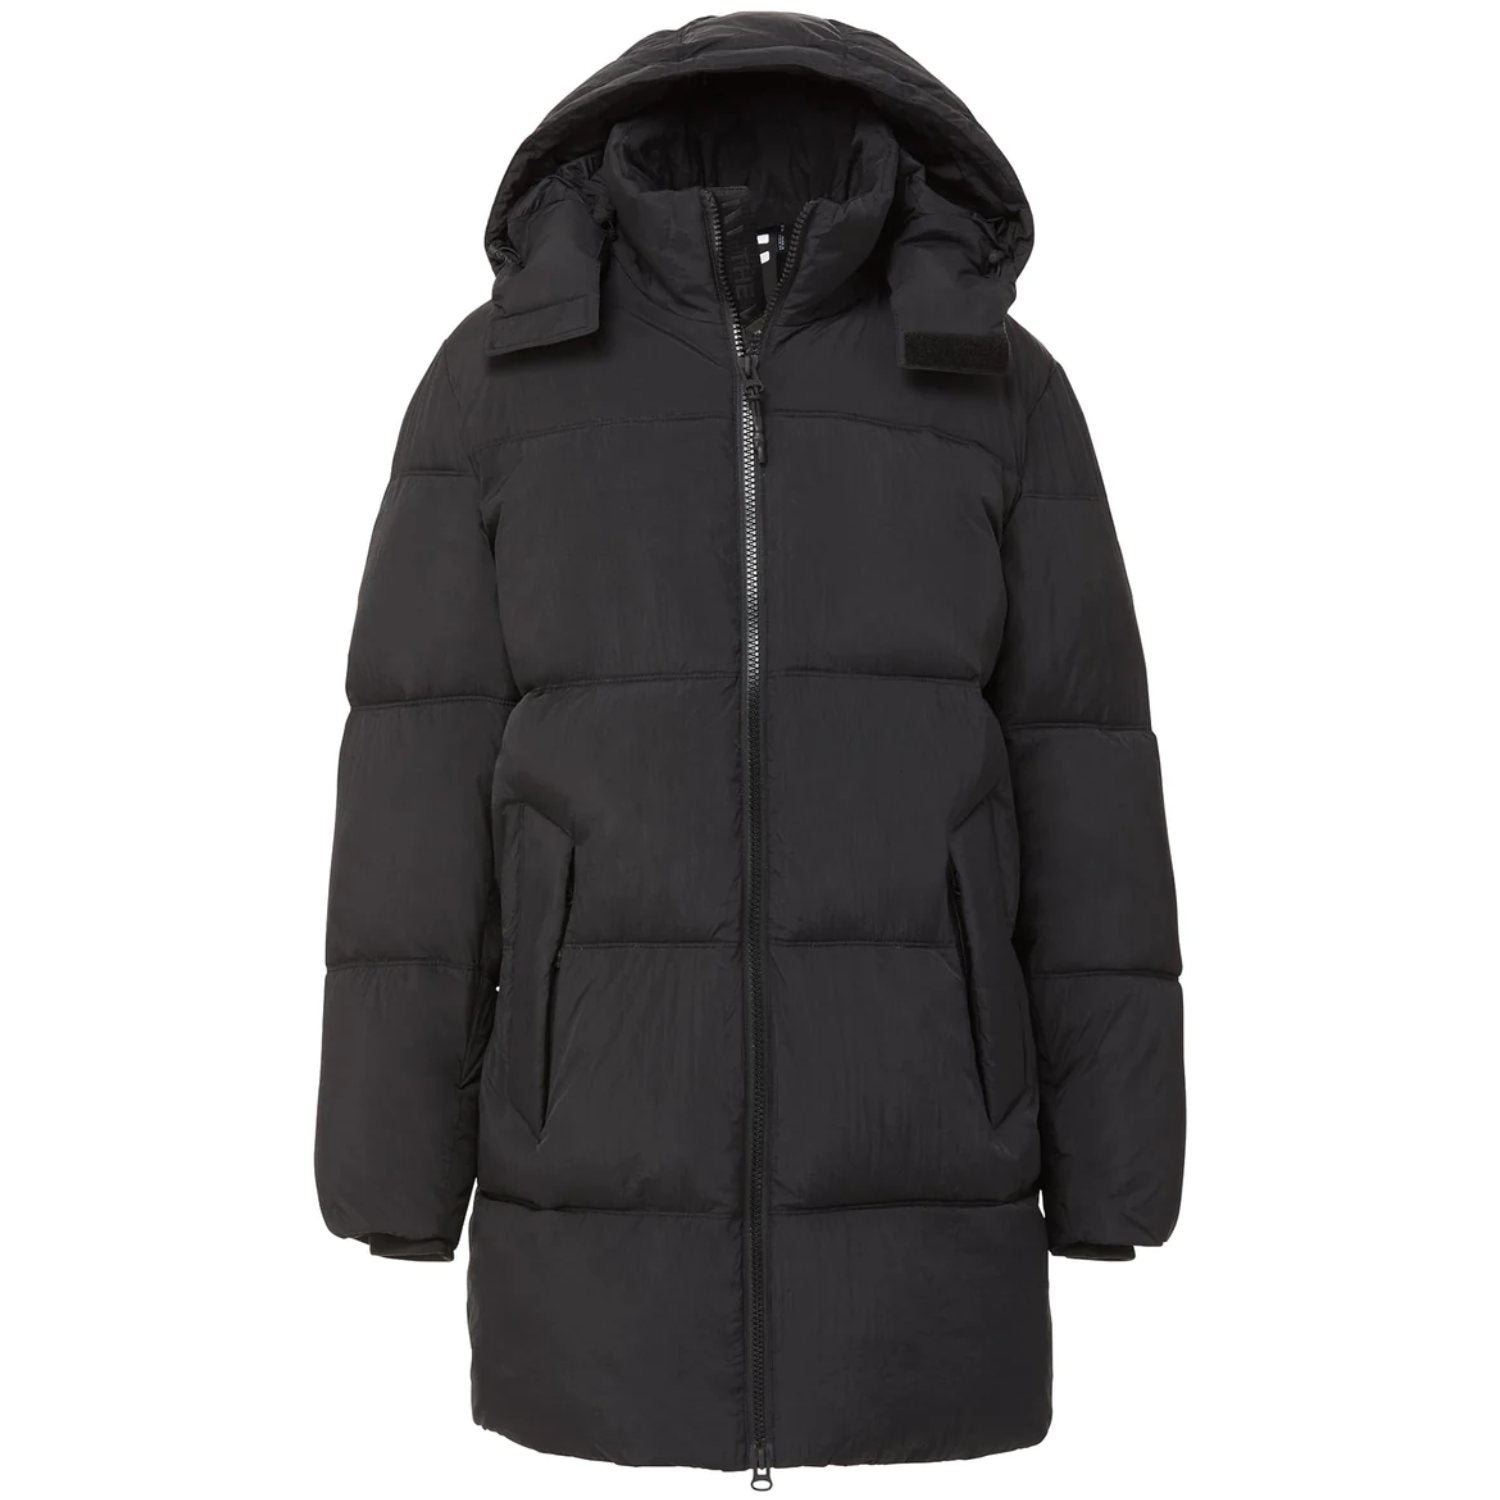 The Very Warm - Long Puffer Jacket - Black Polyfilled